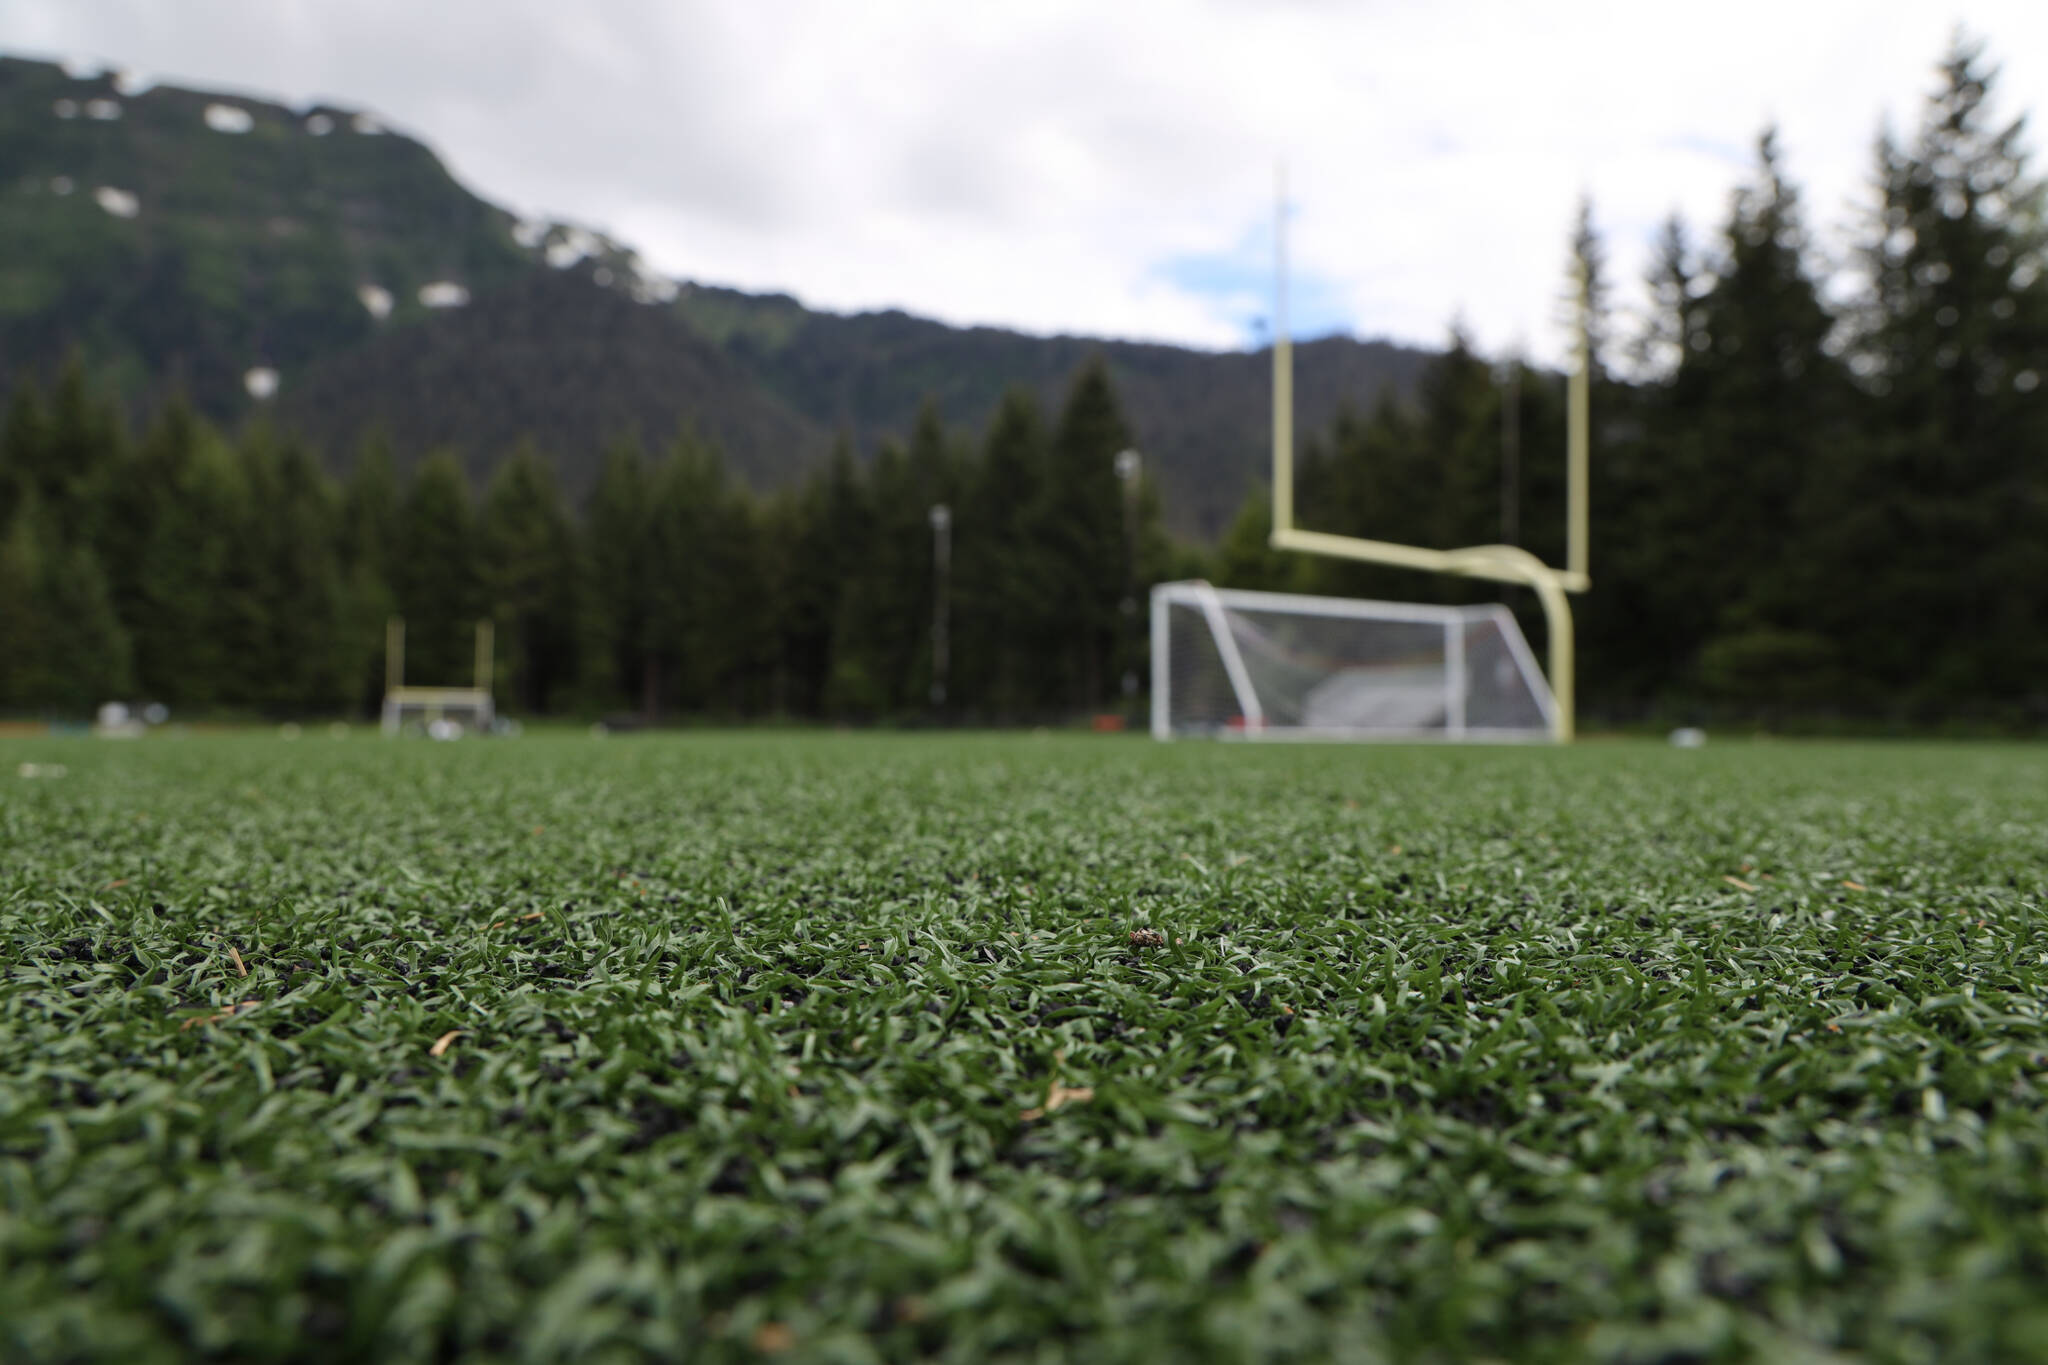 Adair-Kennedy Memorial Park is set to get new artificial turf despite its link to PFAS (Per- and polyfluoroalkyl substances), according to city officials. The project will be designed over the winter, with construction likely beginning in the summer of 2024. (Clarise Larson / Juneau Empire)